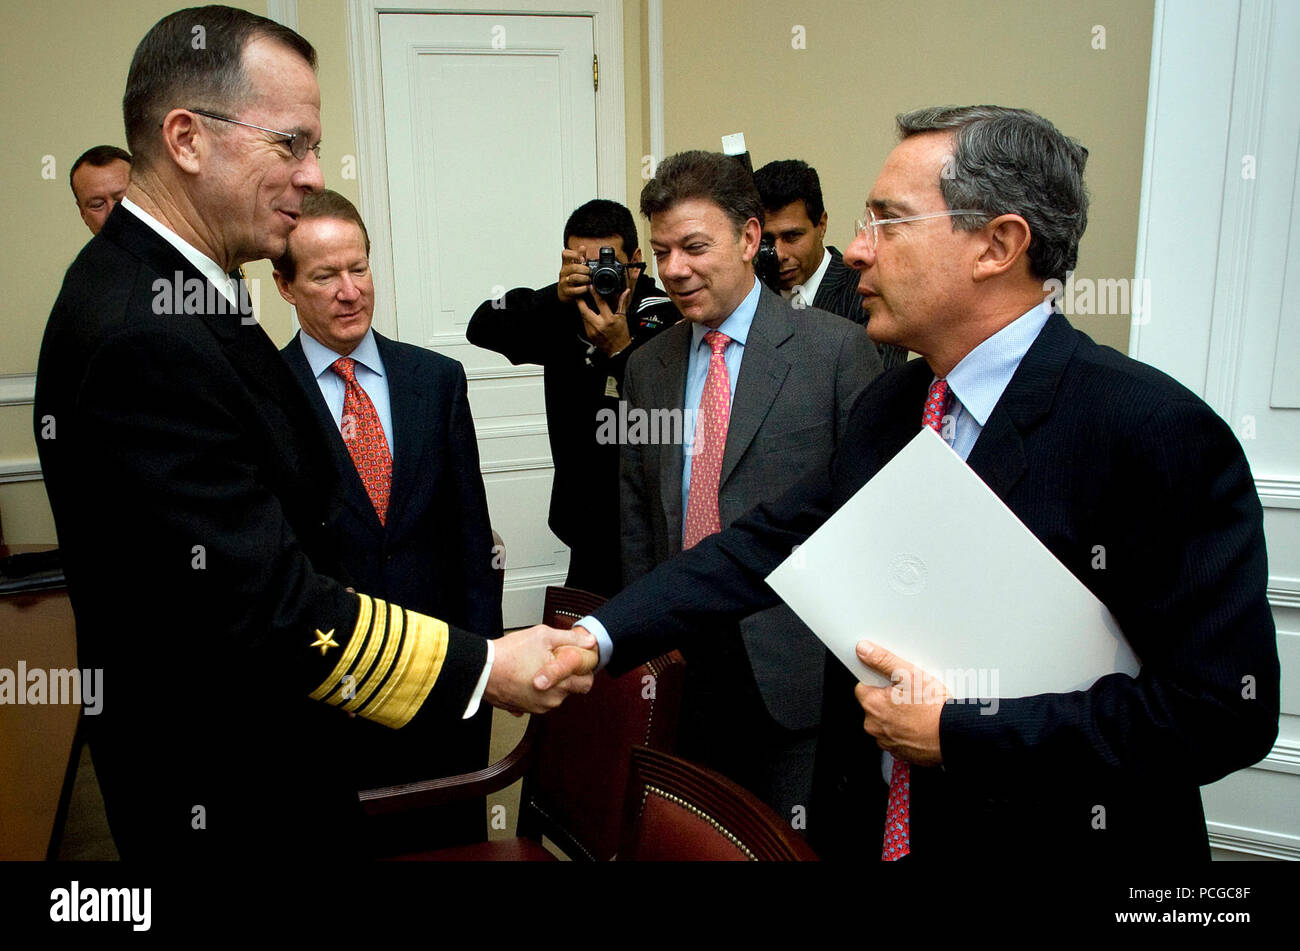 Columbia (Jan. 17, 2008) - U.S. Navy Adm. Mike Mullen, chairman of the Joint Chiefs of Staff along with the honorable William Brownfield, U.S. Ambassador to Columbia and Dr. Juan Manuel Santos, Columbian minister of defense greet Columbian President Dr. Alvaro Uribe Velez at the presidential palace in Bogota, Columbia, Jan 17, 2007. Mullen is wrapping up a five-day trip to the U.S. Southern Command area of operations with a final stop in San Salvador, El Salvador. Stock Photo